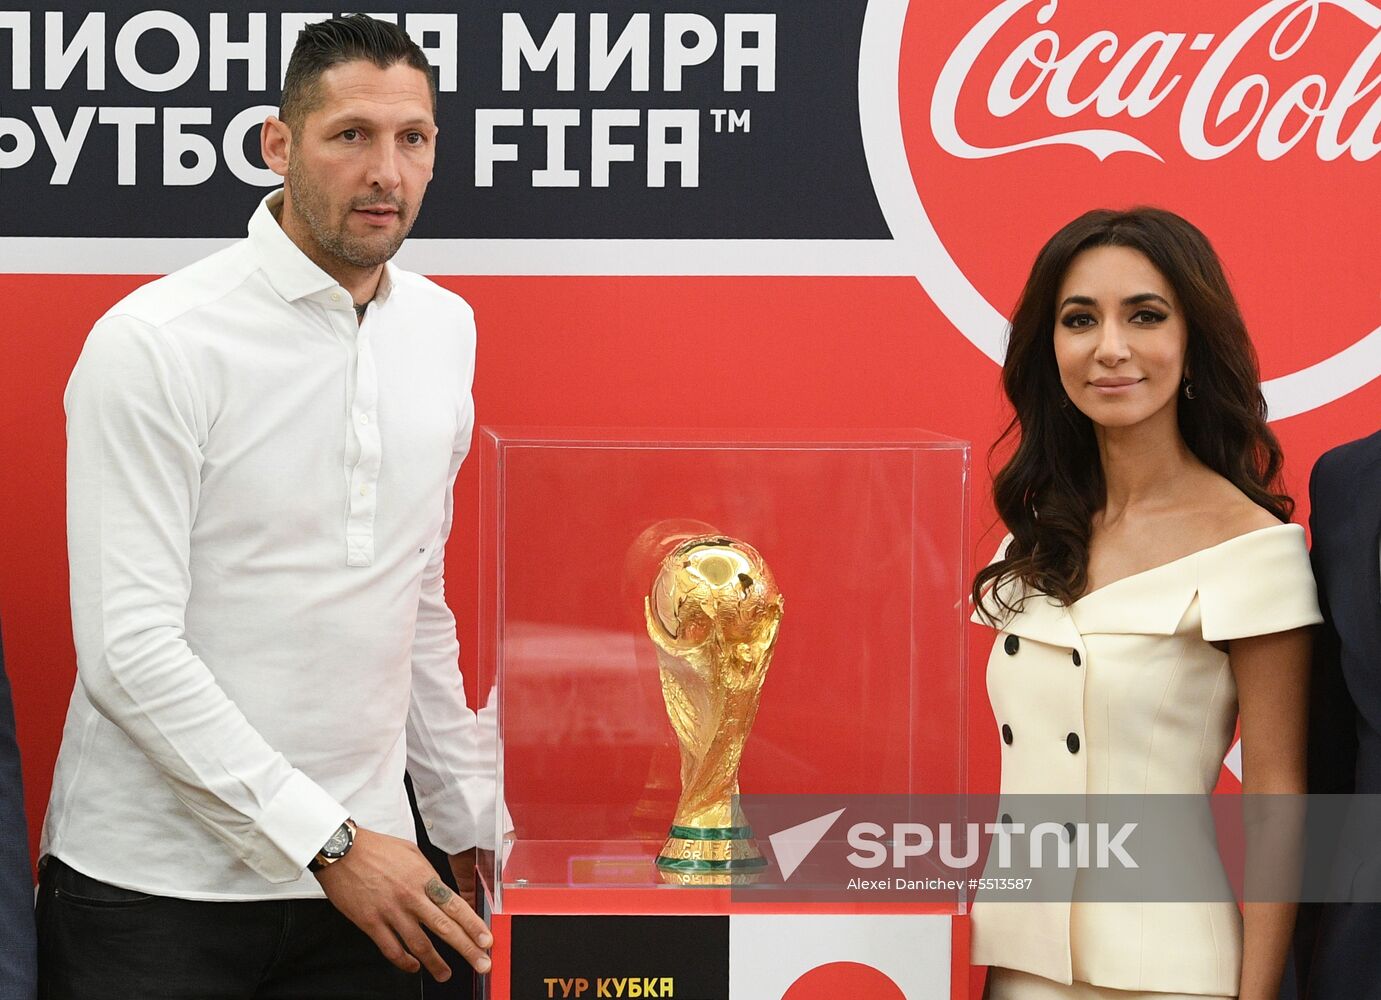 FIFA World Cup Trophy presentation in St. Petersburg